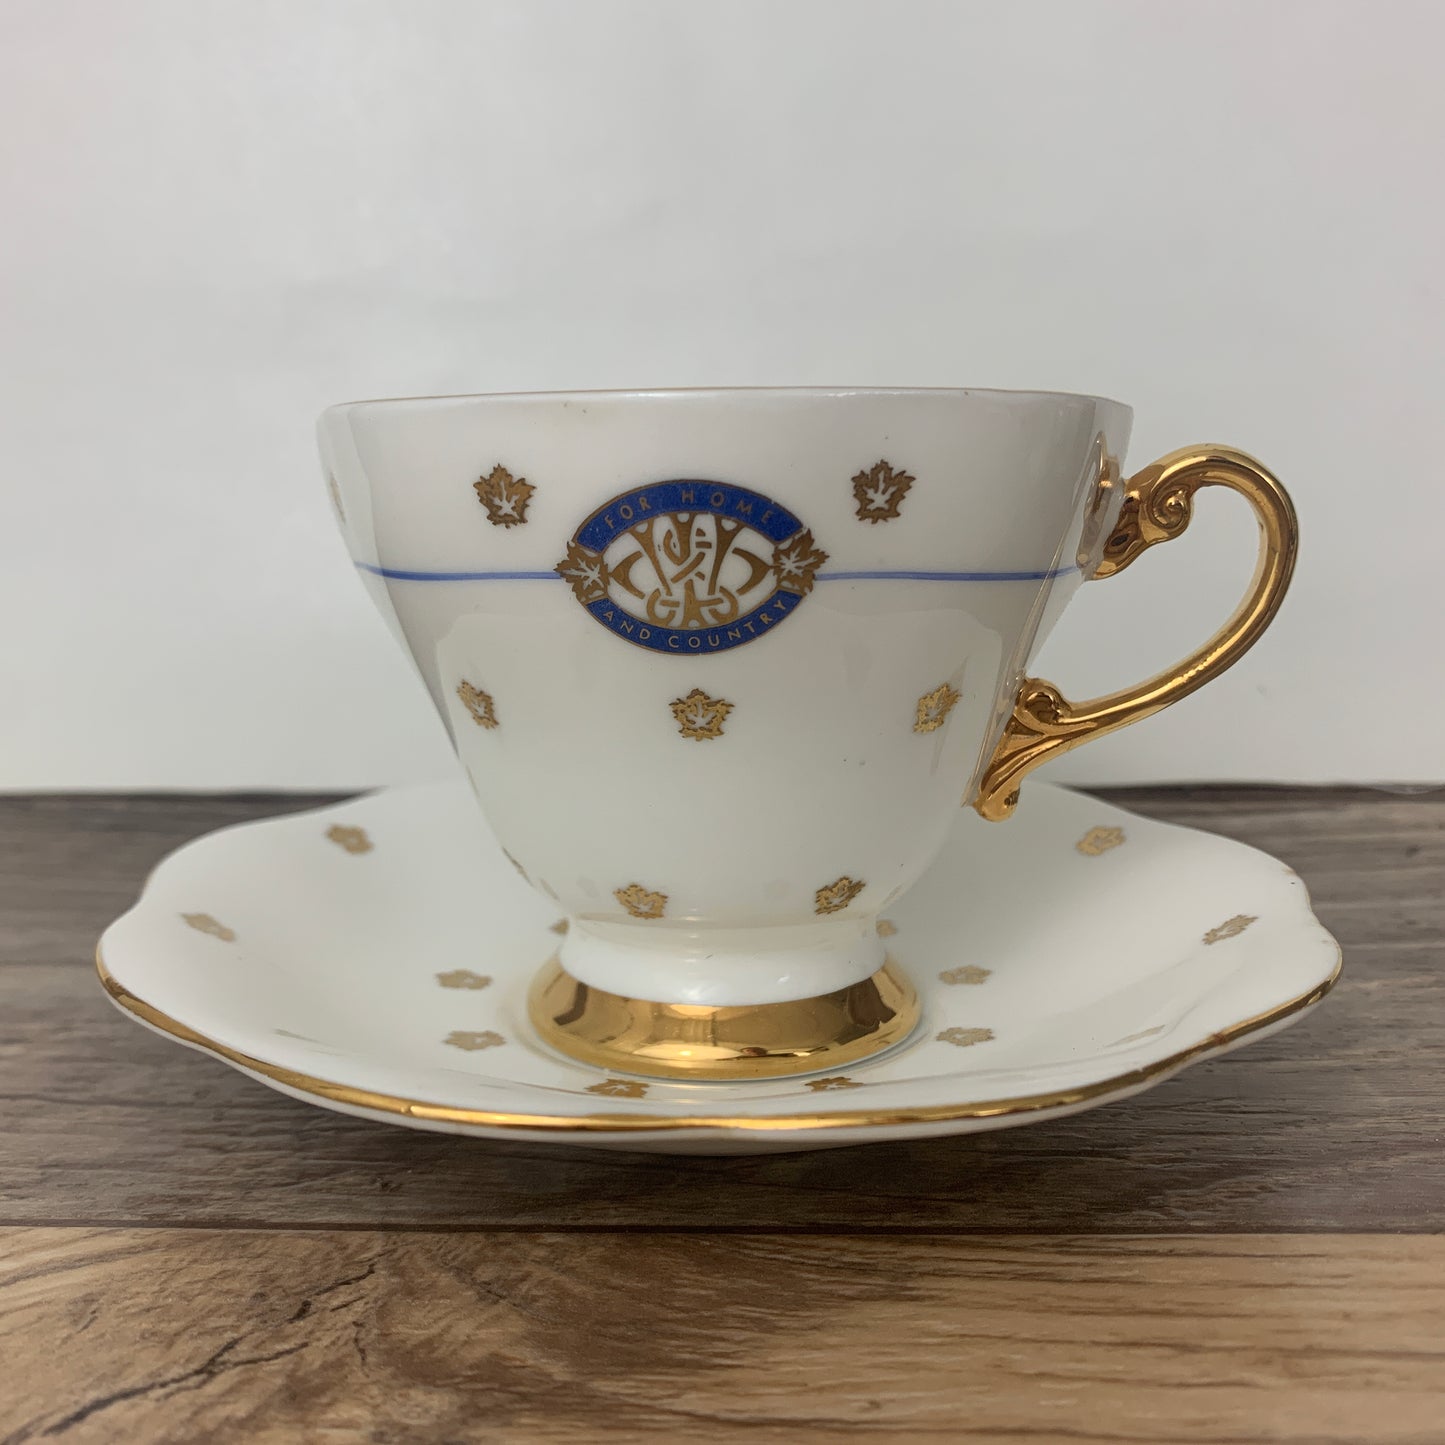 White and Gold Vintage Teacup and Saucer For Home and Country EB Foley